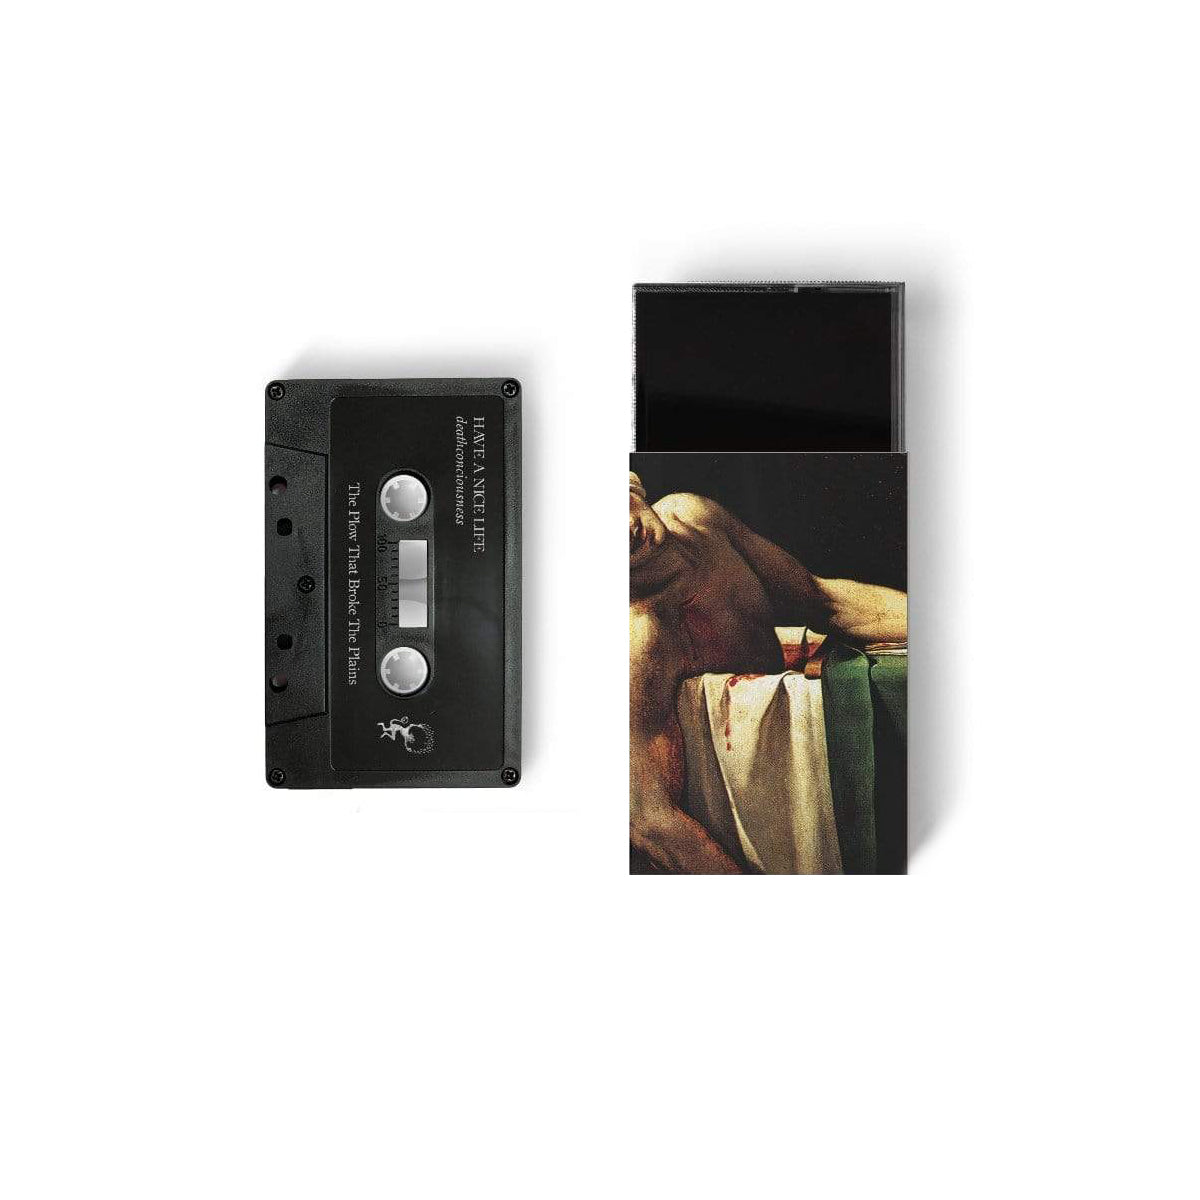 HAVE A NICE LIFE "Deathconsciousness" Tape